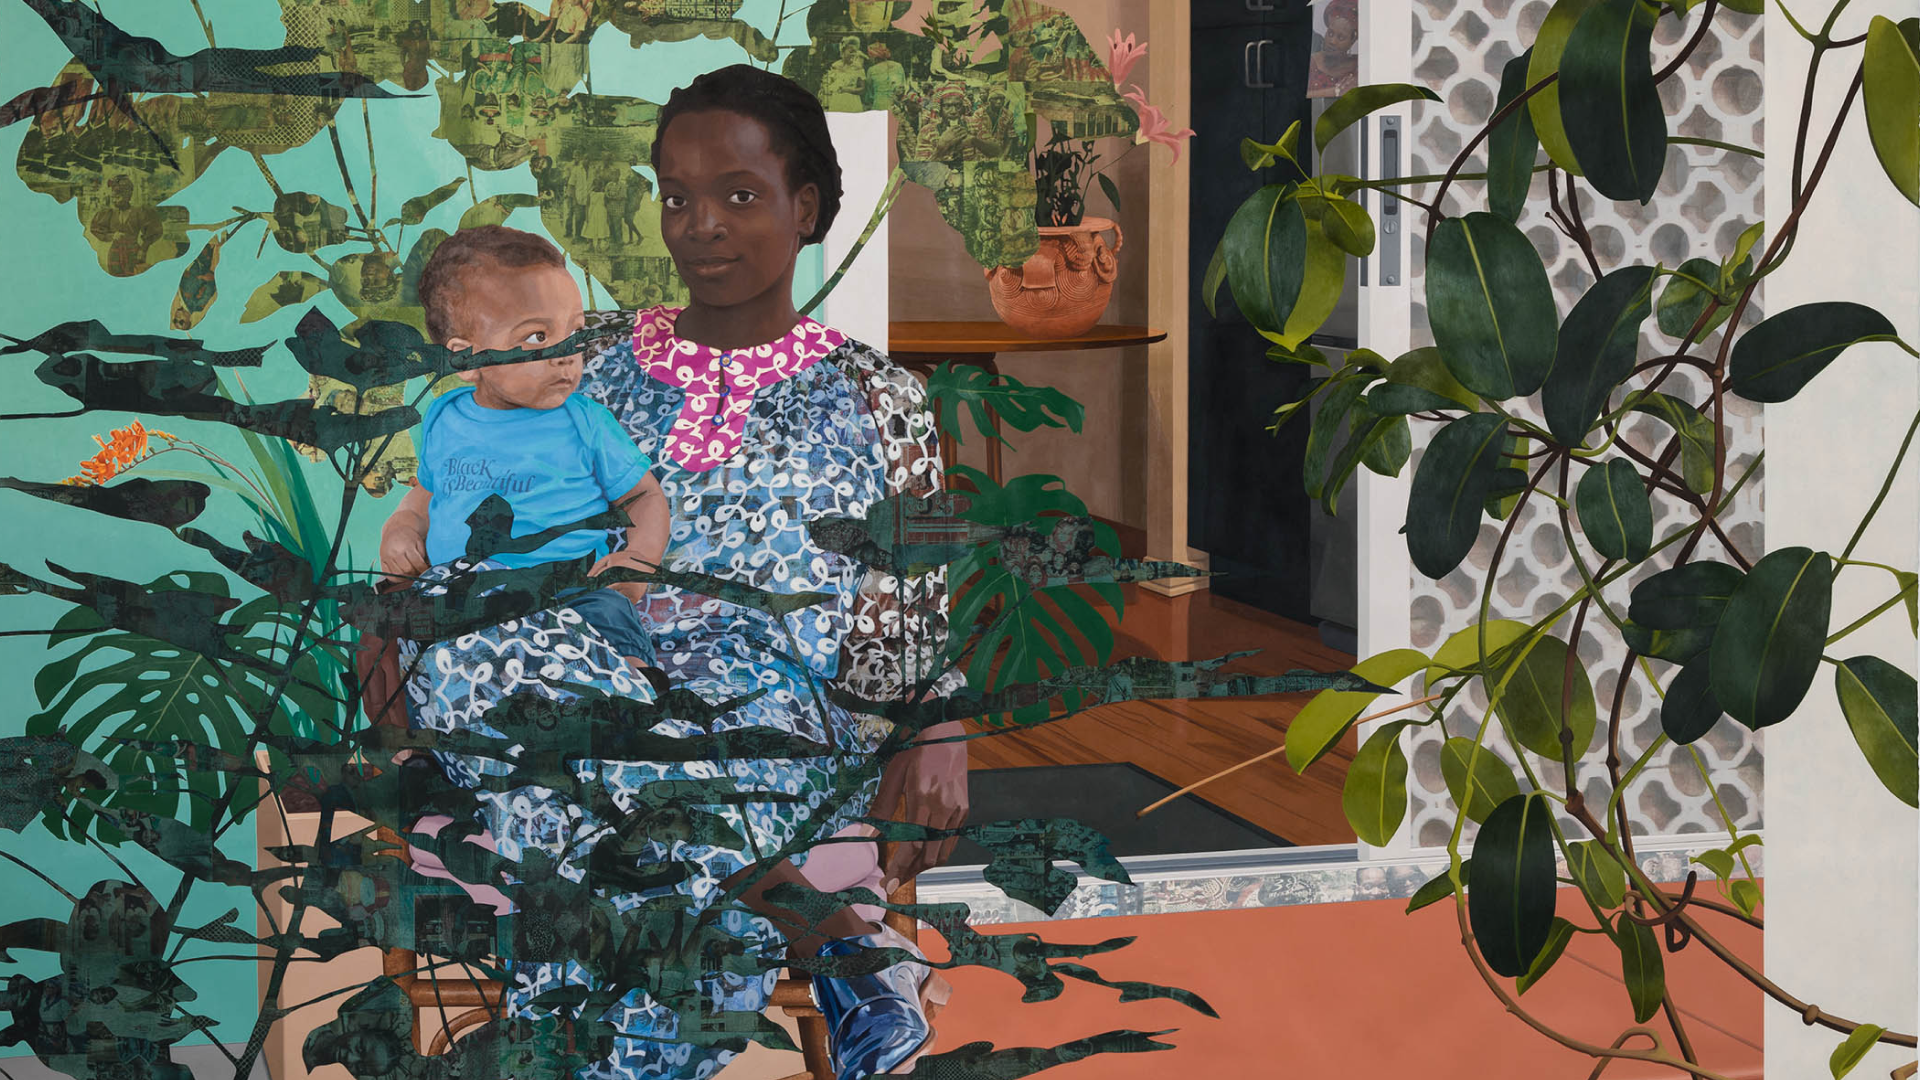 A detail from a painting by Njideka Akunyili Crosby, titled Still You Bloom in This Land of No Gardens, dated 2020.